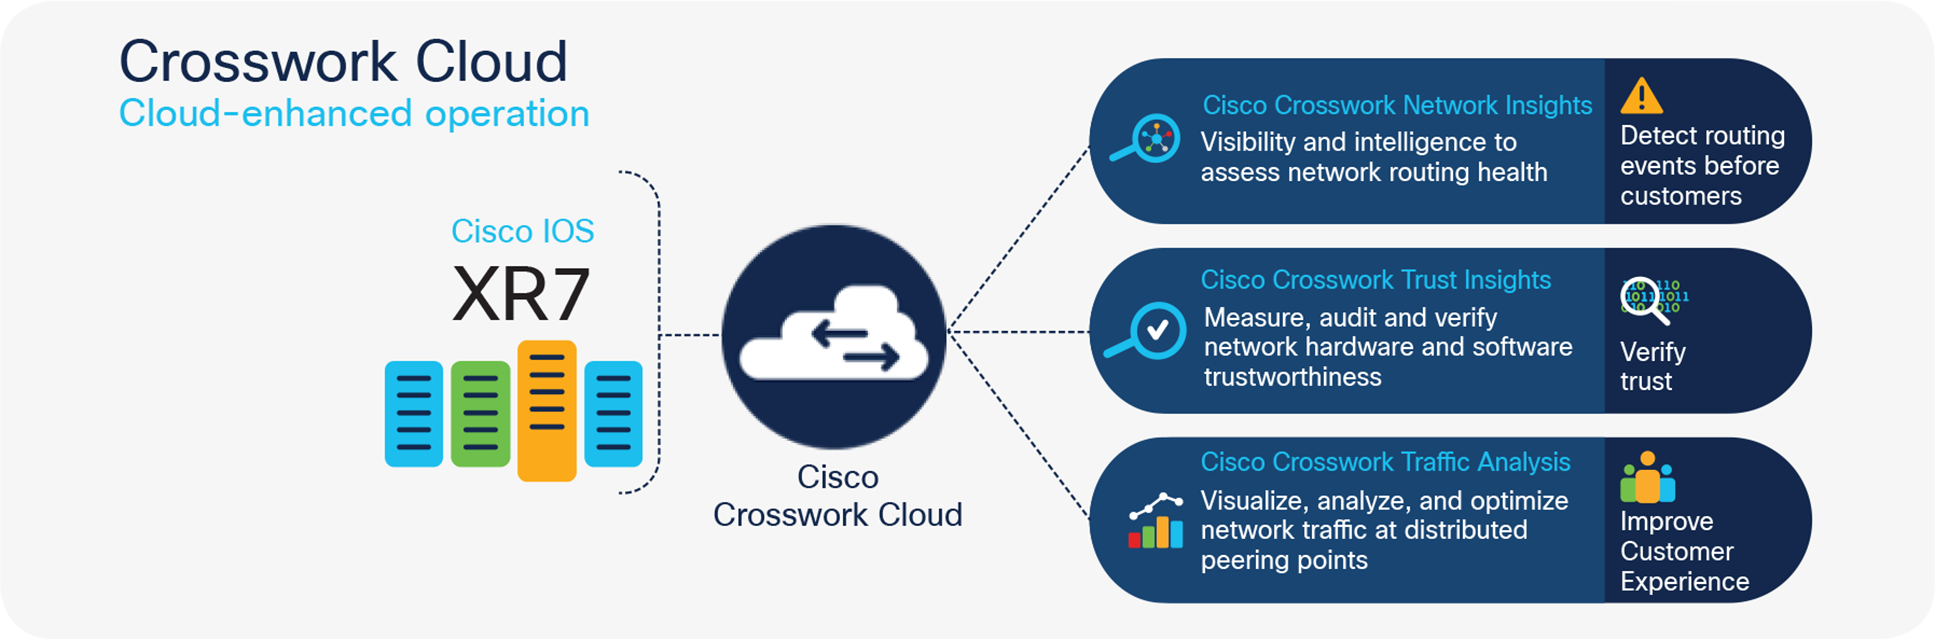 Cisco Crosswork Cloud features Network Insights, Trust Insights, and Traffic Analysis